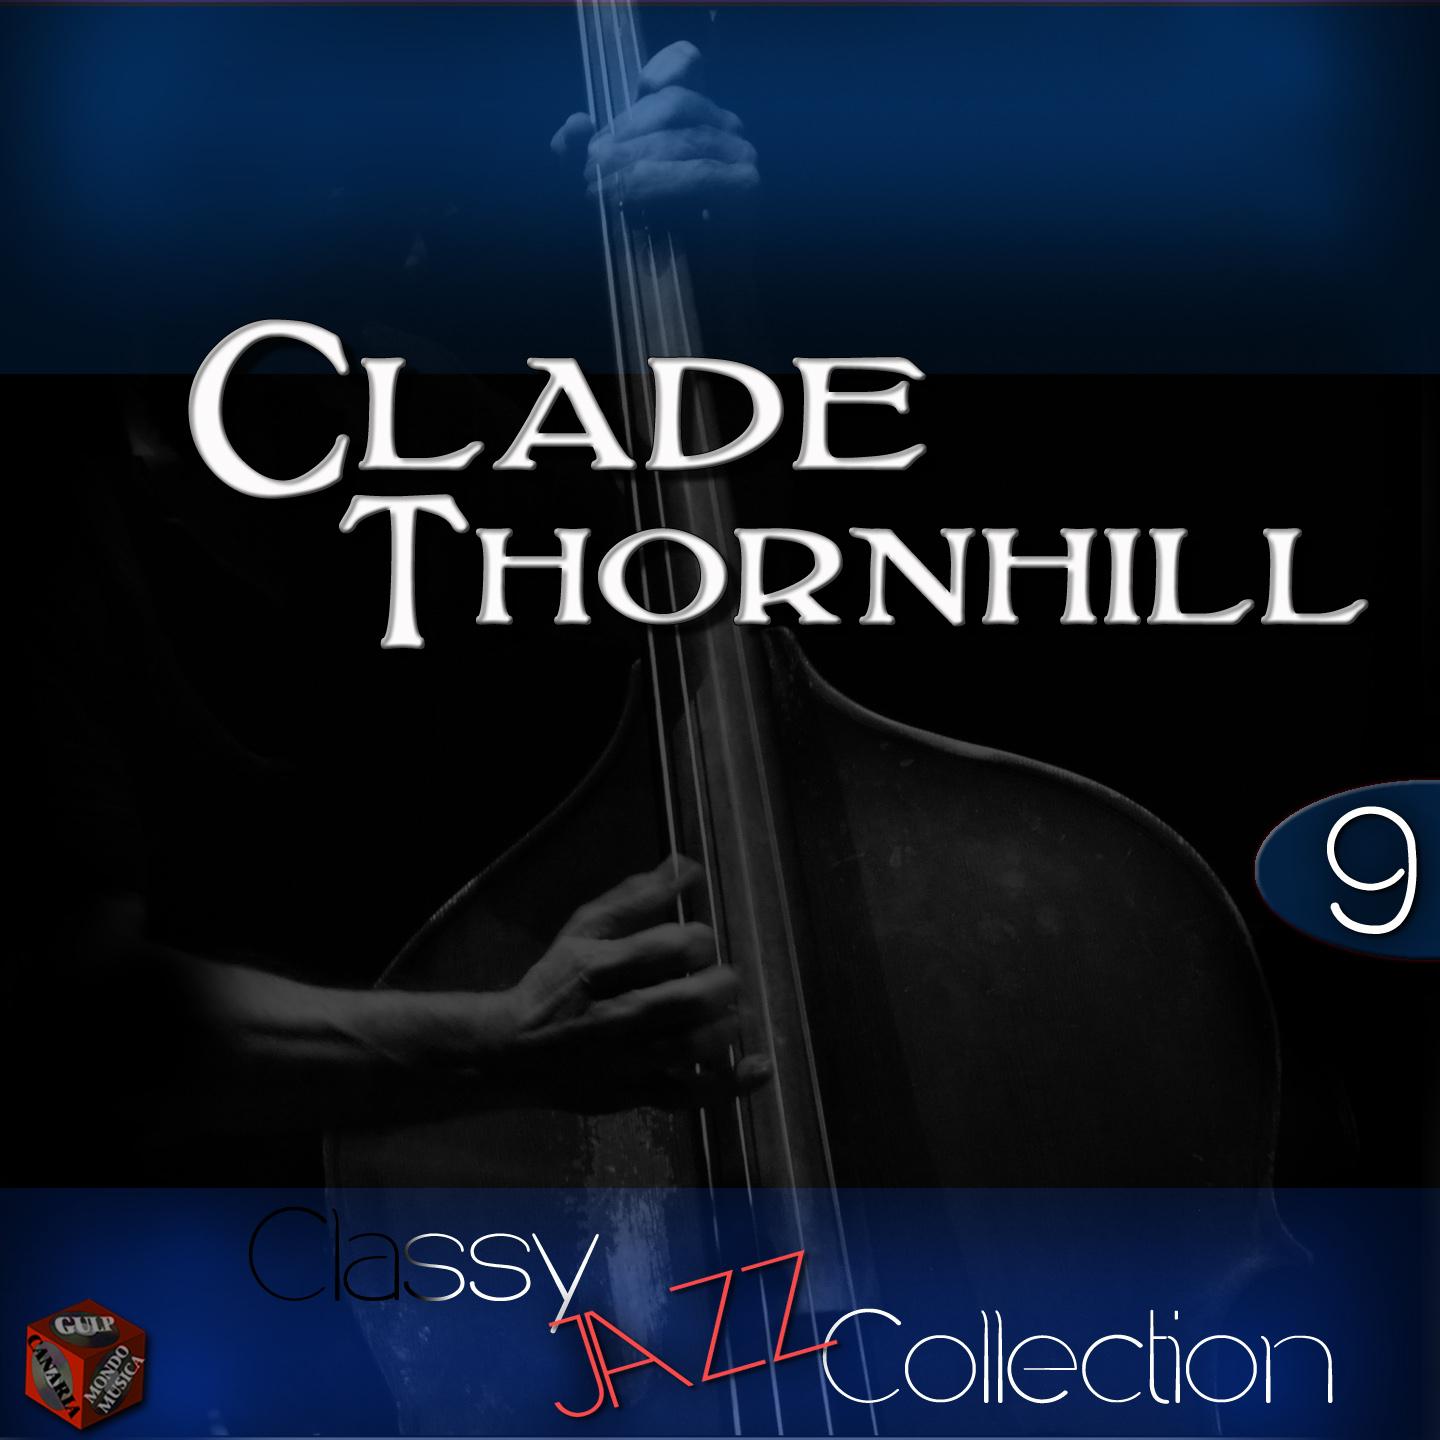 Classy Jazz Collection: Claude Thornhill, Vol. 9